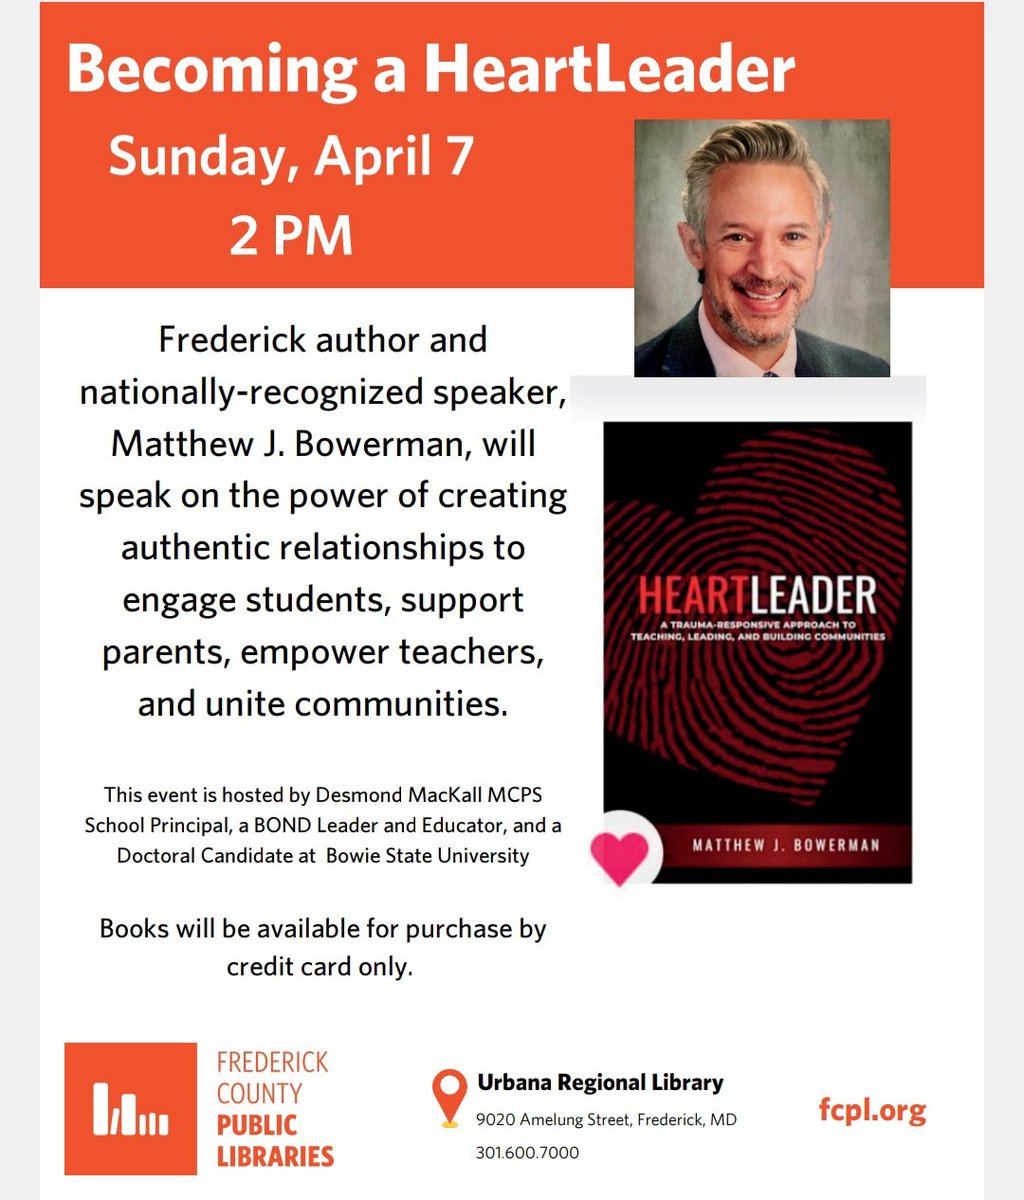 Honored to partner with friend and colleague Desmond Mackall @MHES_Principal & @FredCoLibrary today to share the love, learning, and Heartleading! 2pm,Urbana branch!
@AlainaClarkWein @darylhowardphd @WeinsteinEdu @teachergoals @MHES_Principal 
#Heartleader 
#MentalHealthMatters